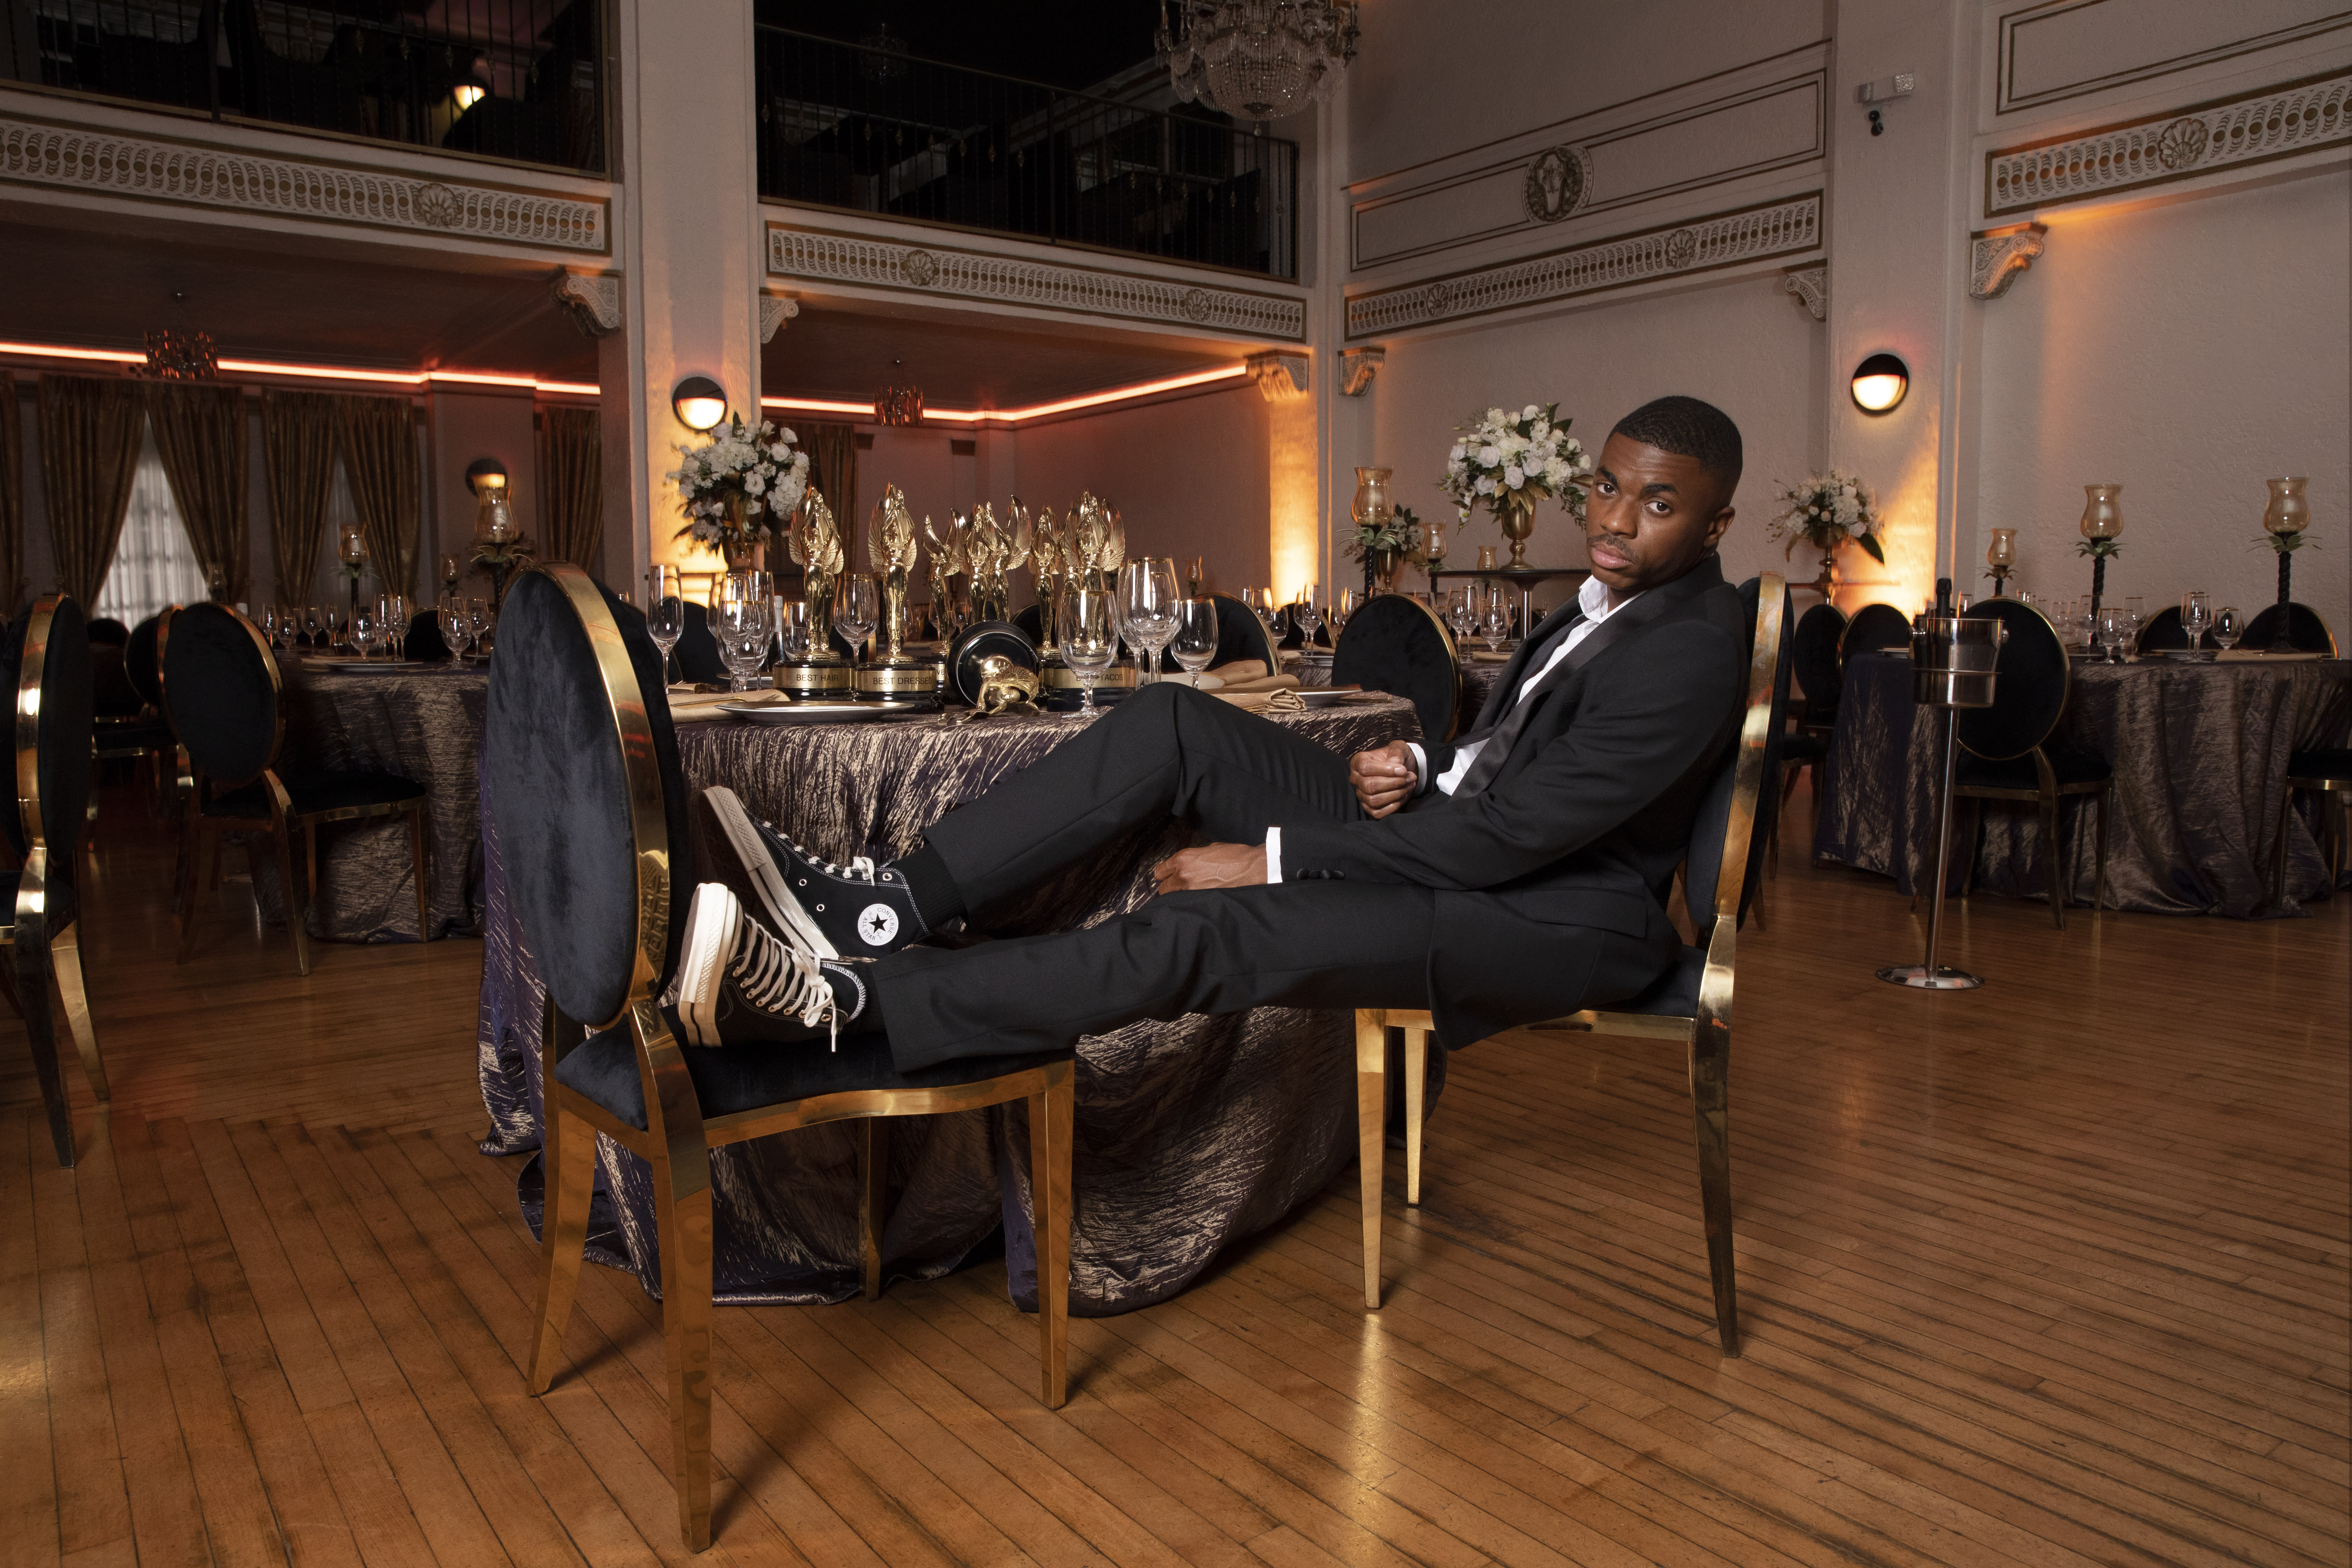 Vince Staples sits on a chair at a table that has numerous trophies on it